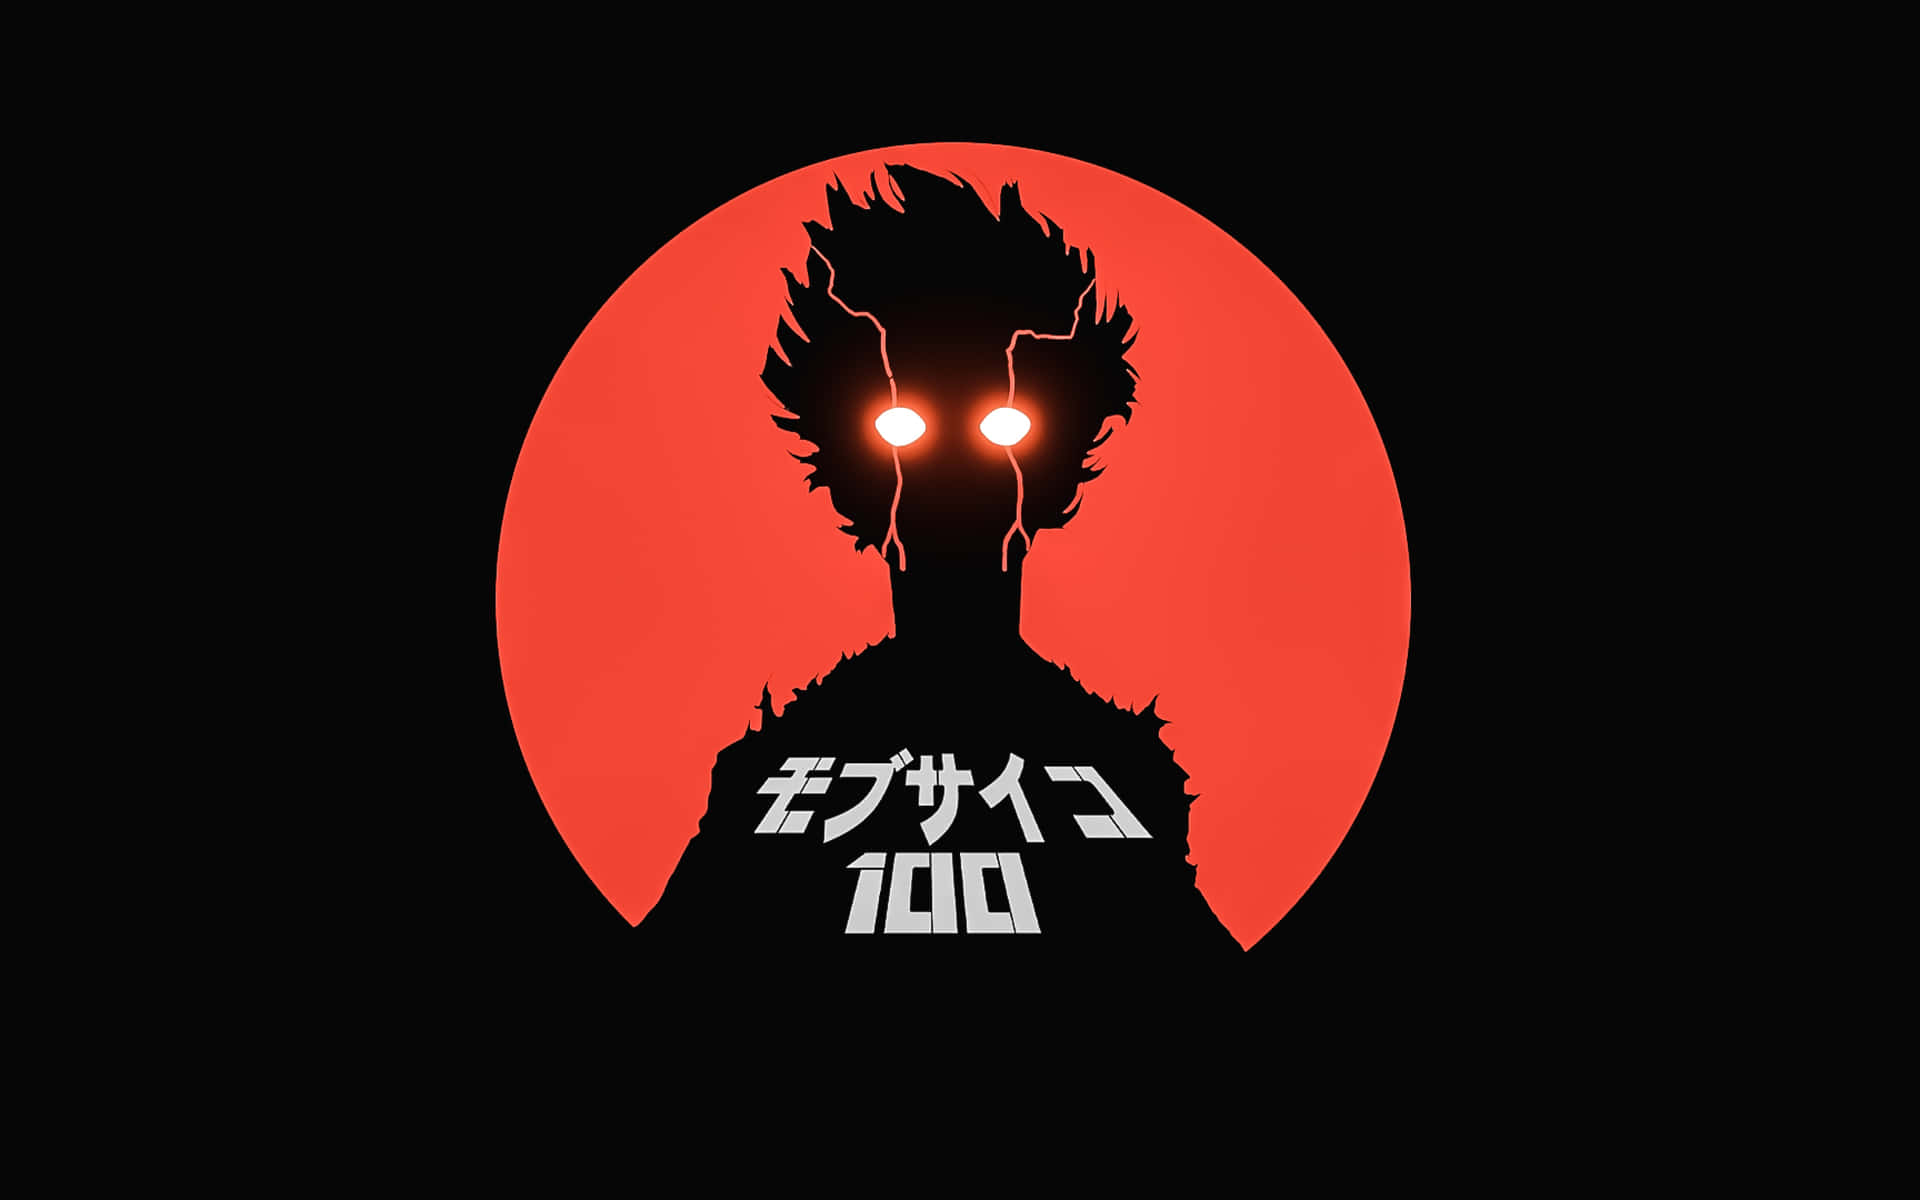 "Be Yourself and Follow Your Own Path - #MobPsycho100"